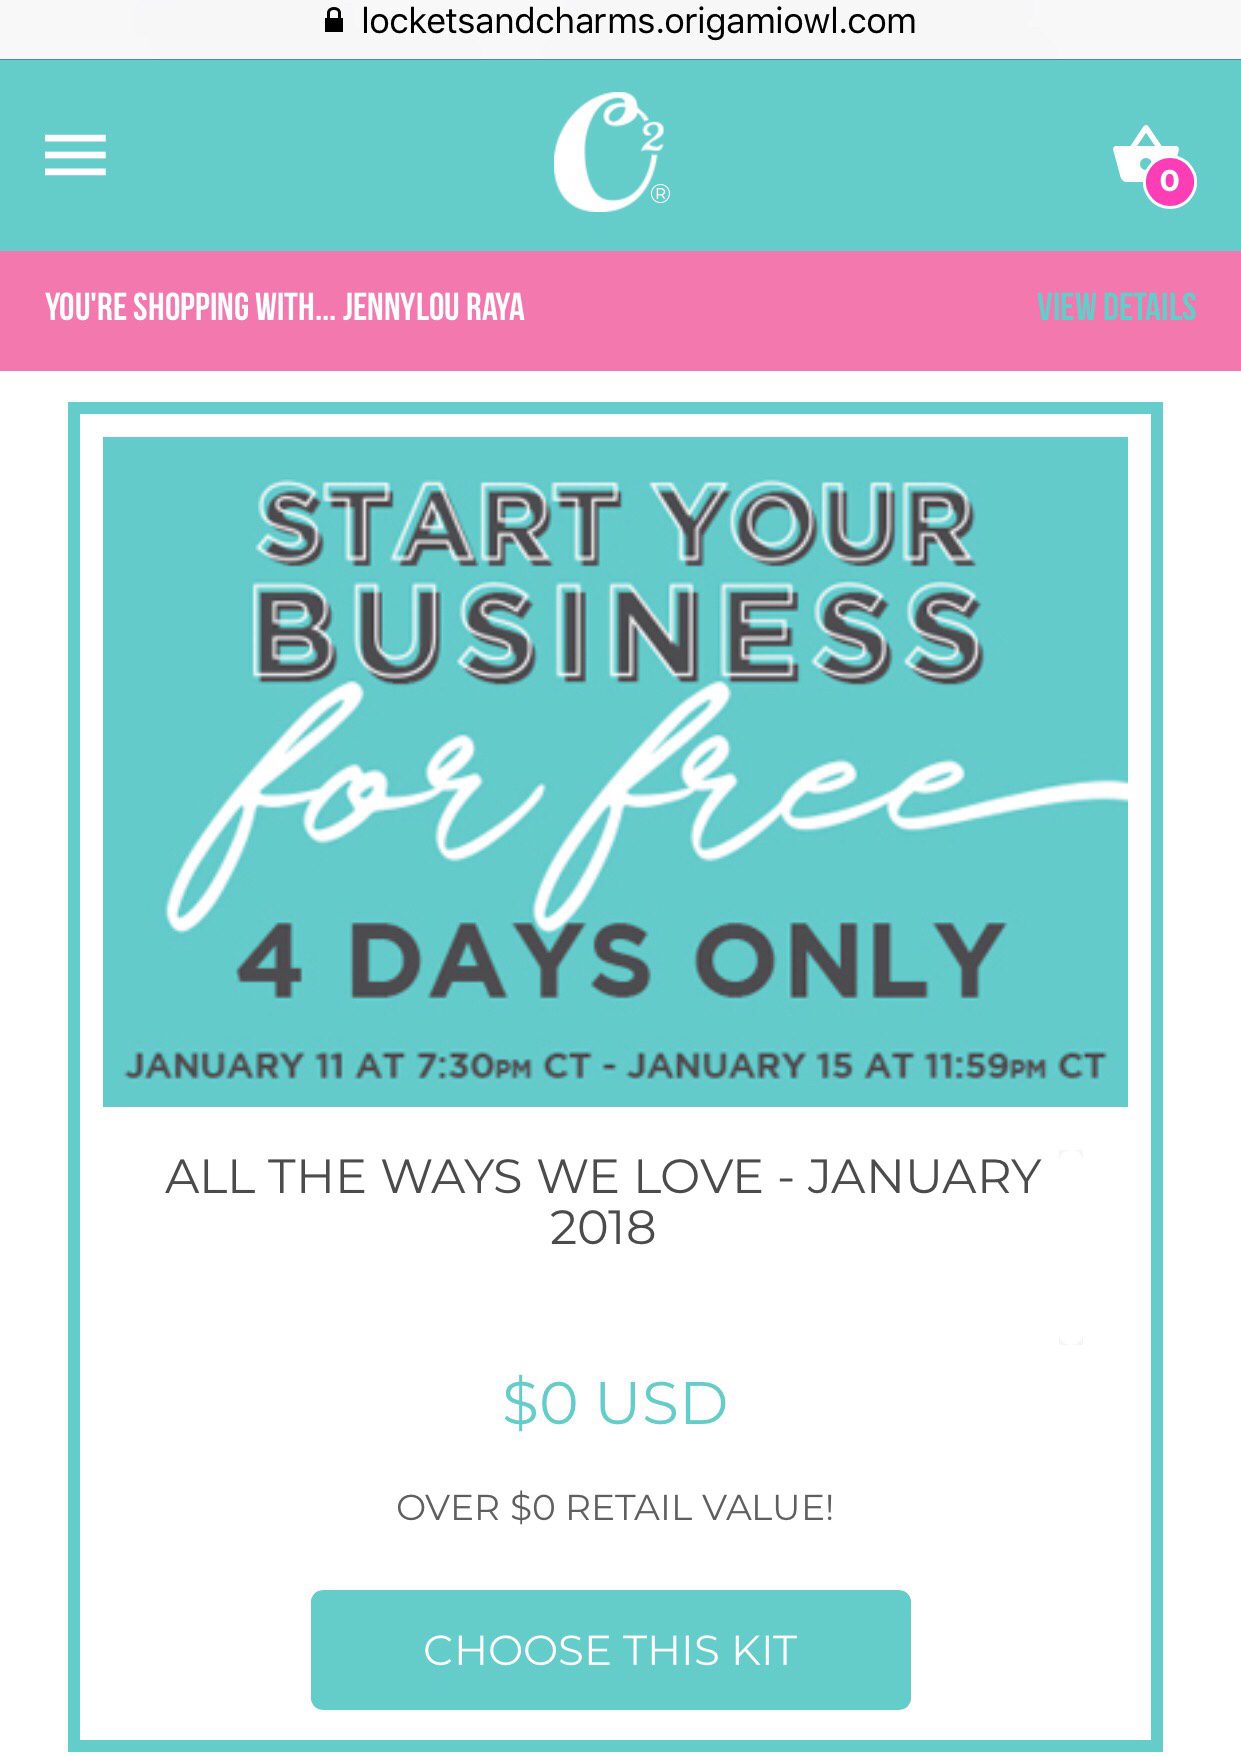 4 Days To Join Origami Owl For Free San Diego Origami Owl